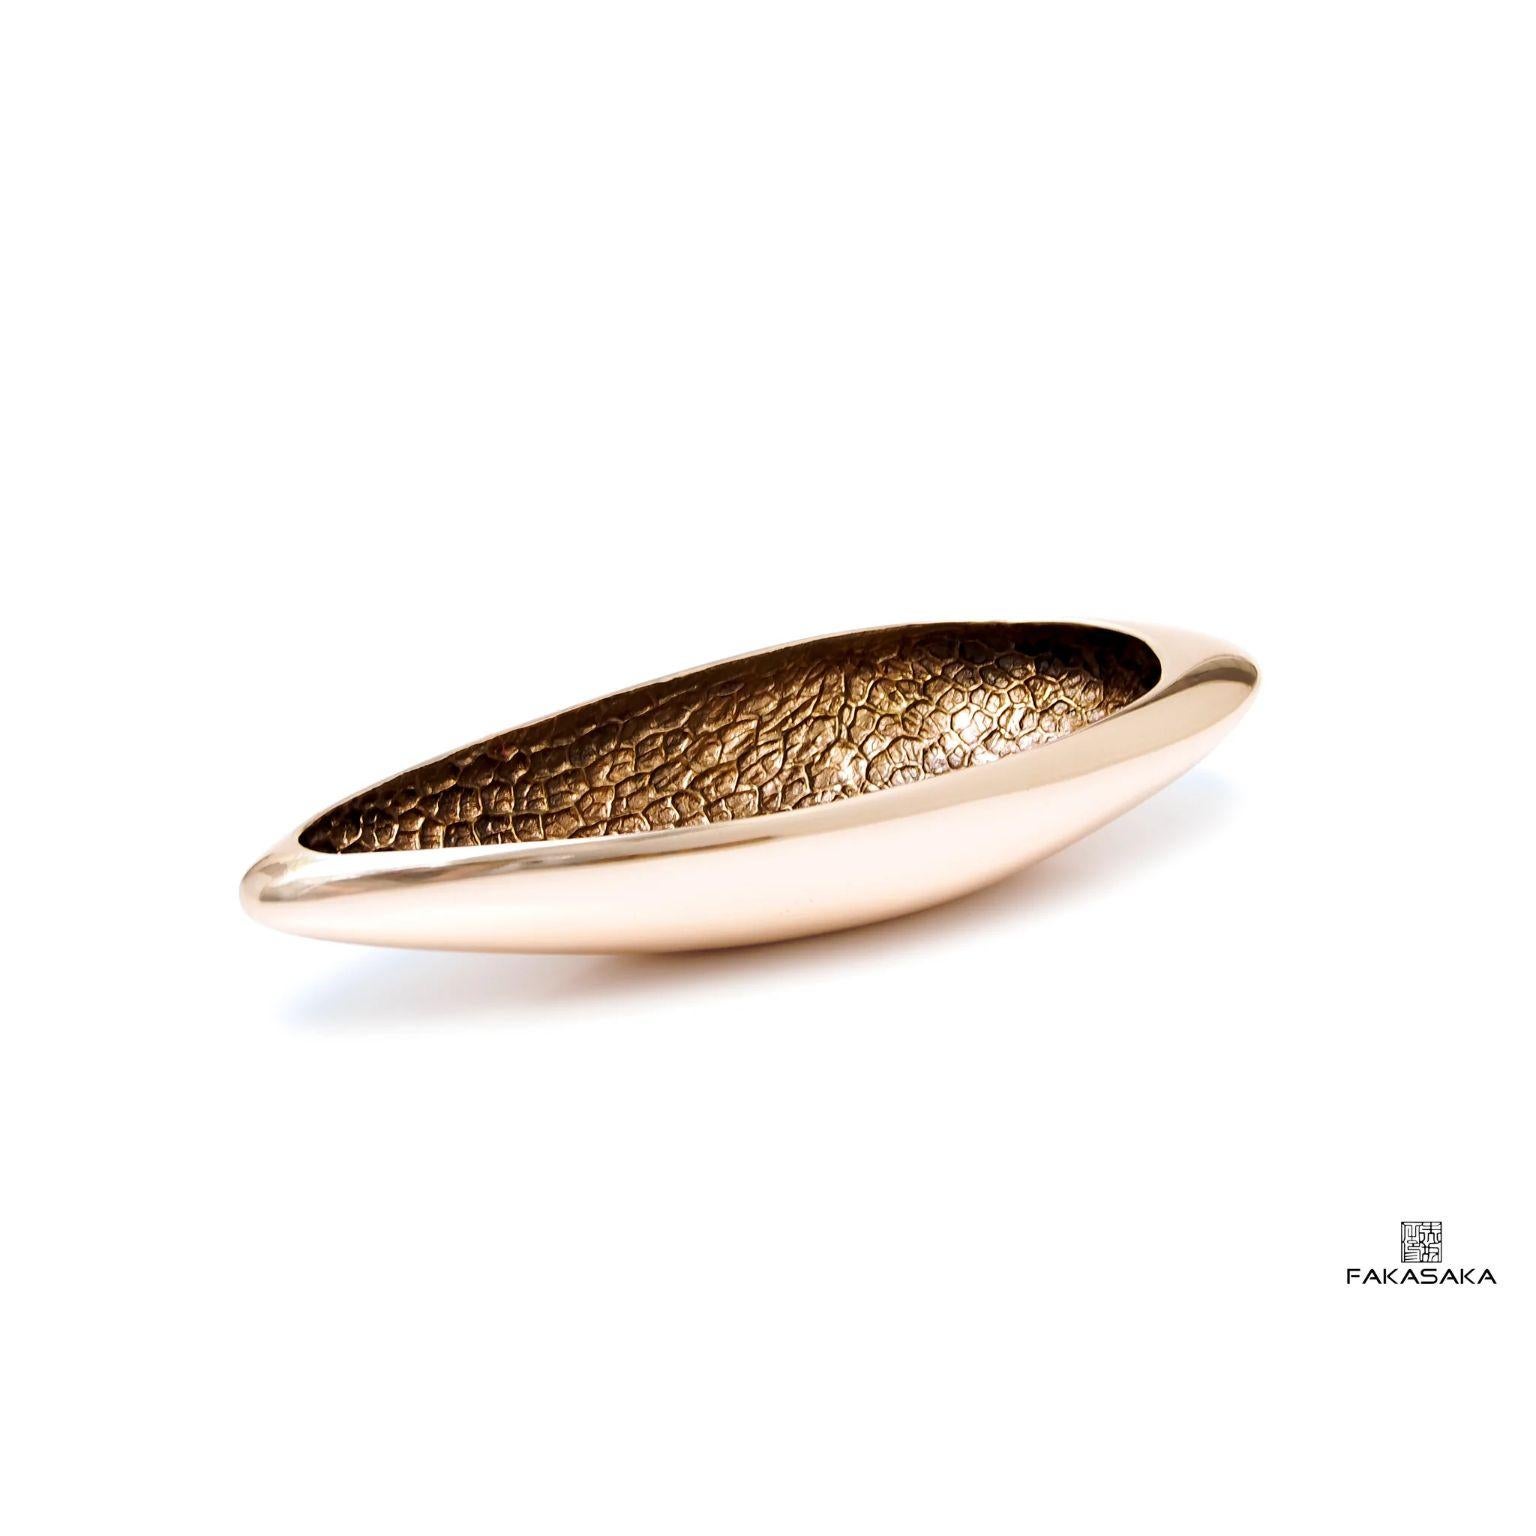 Donna bowl by Fakasaka Design
Dimensions: W 36 cm D 12 cm H 7 cm.
Materials: polished bronze.

 FAKASAKA is a design company focused on production of high-end furniture, lighting, decorative objects, jewels, and accessories.

 Established in 2007,